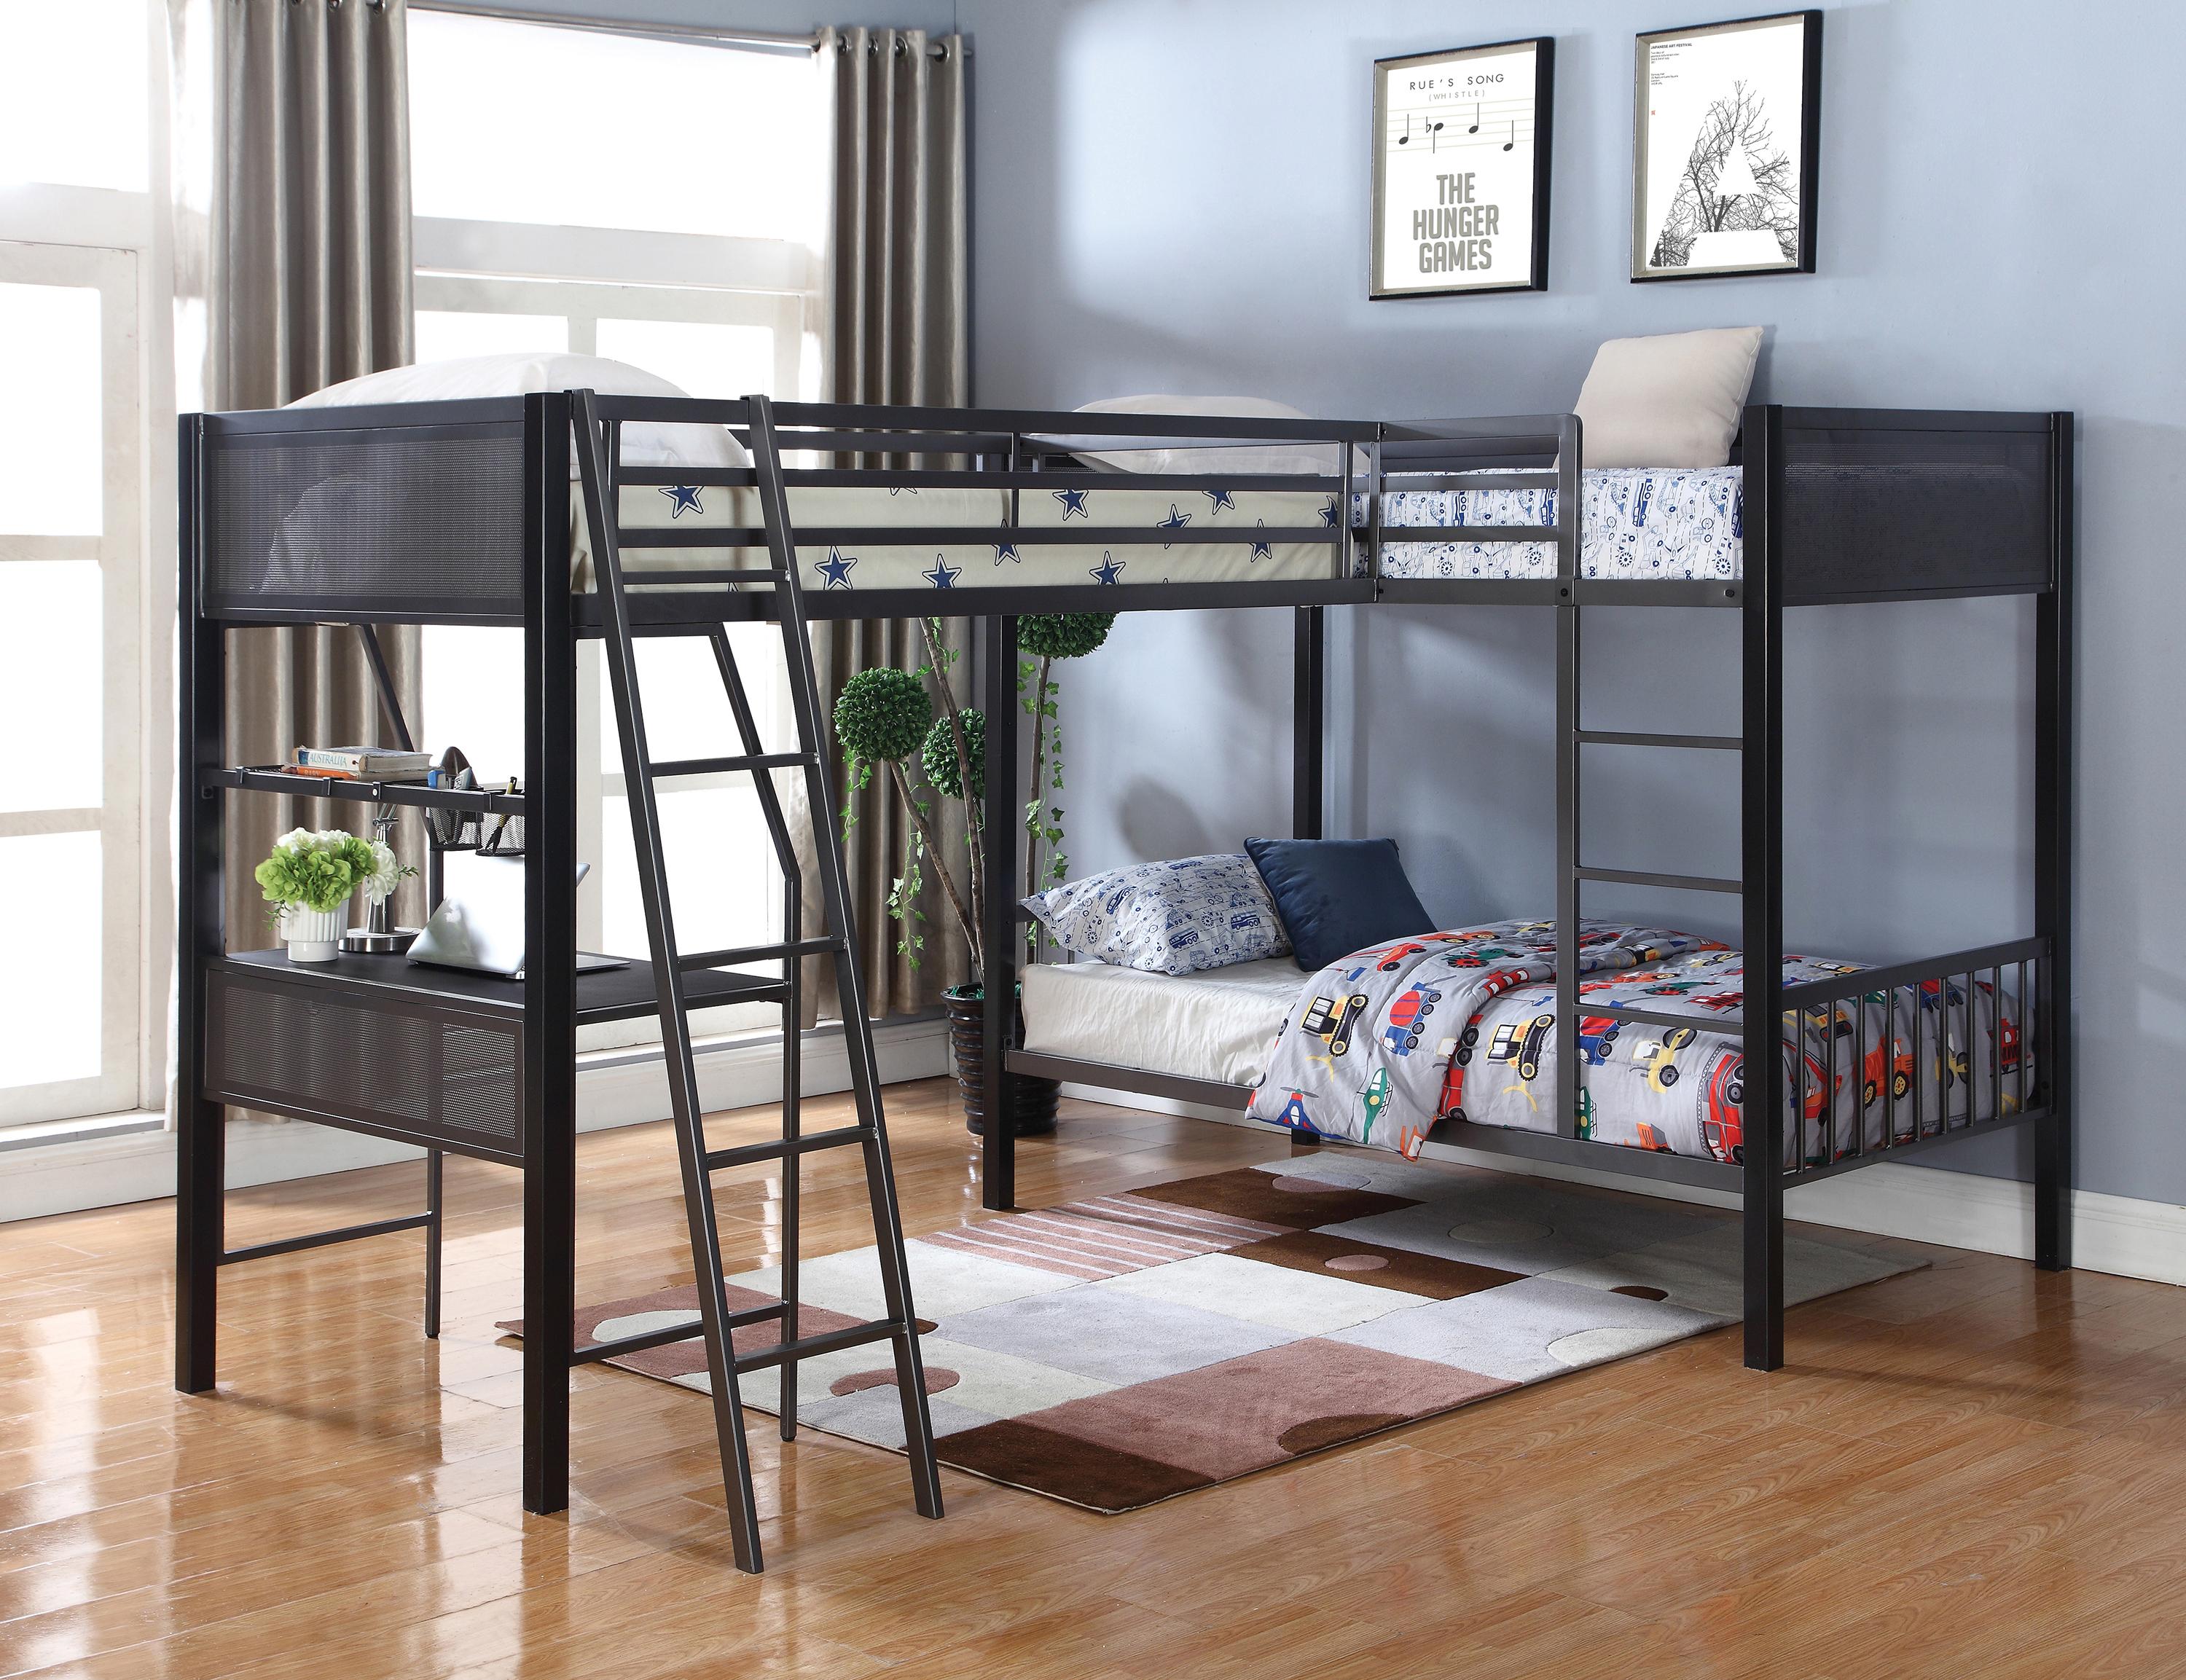 Transitional Bunk Bed Set 460390-S2 Meyers 460390-S2 in Black 